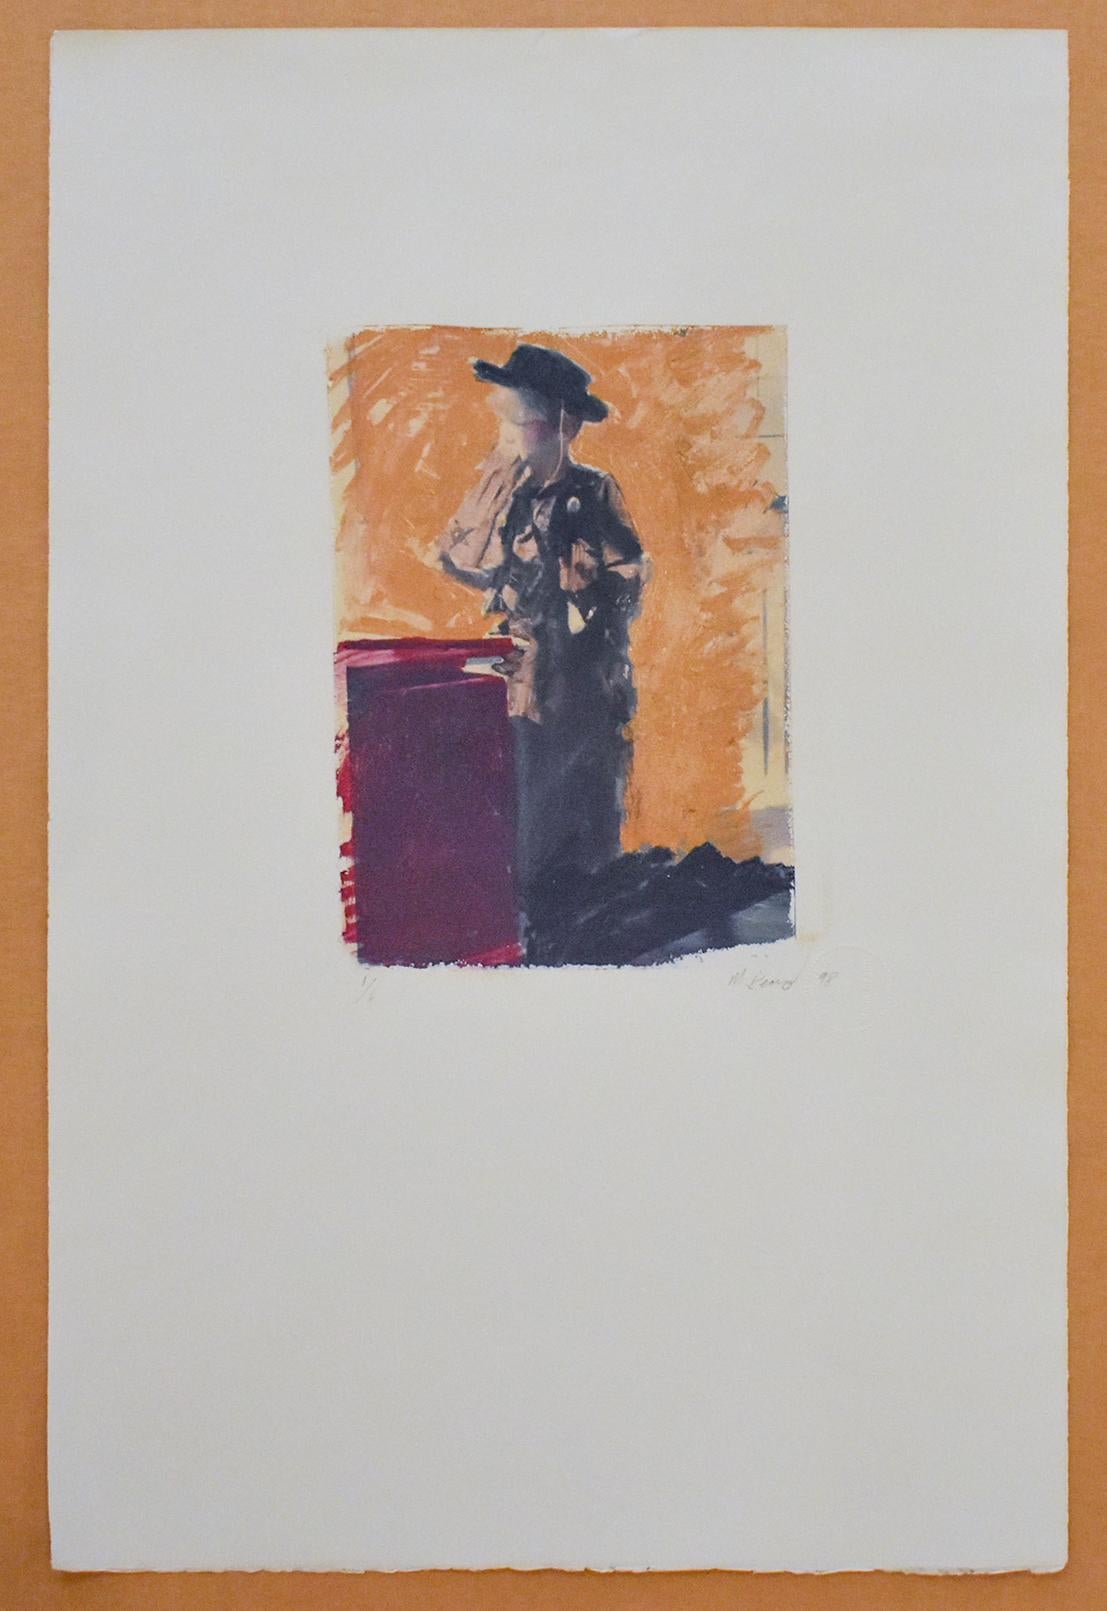 Untitled 25 (Figurative Drawing Polaroid Transfer of a Boy in Cowboy Costume) - Photograph by Mark Beard